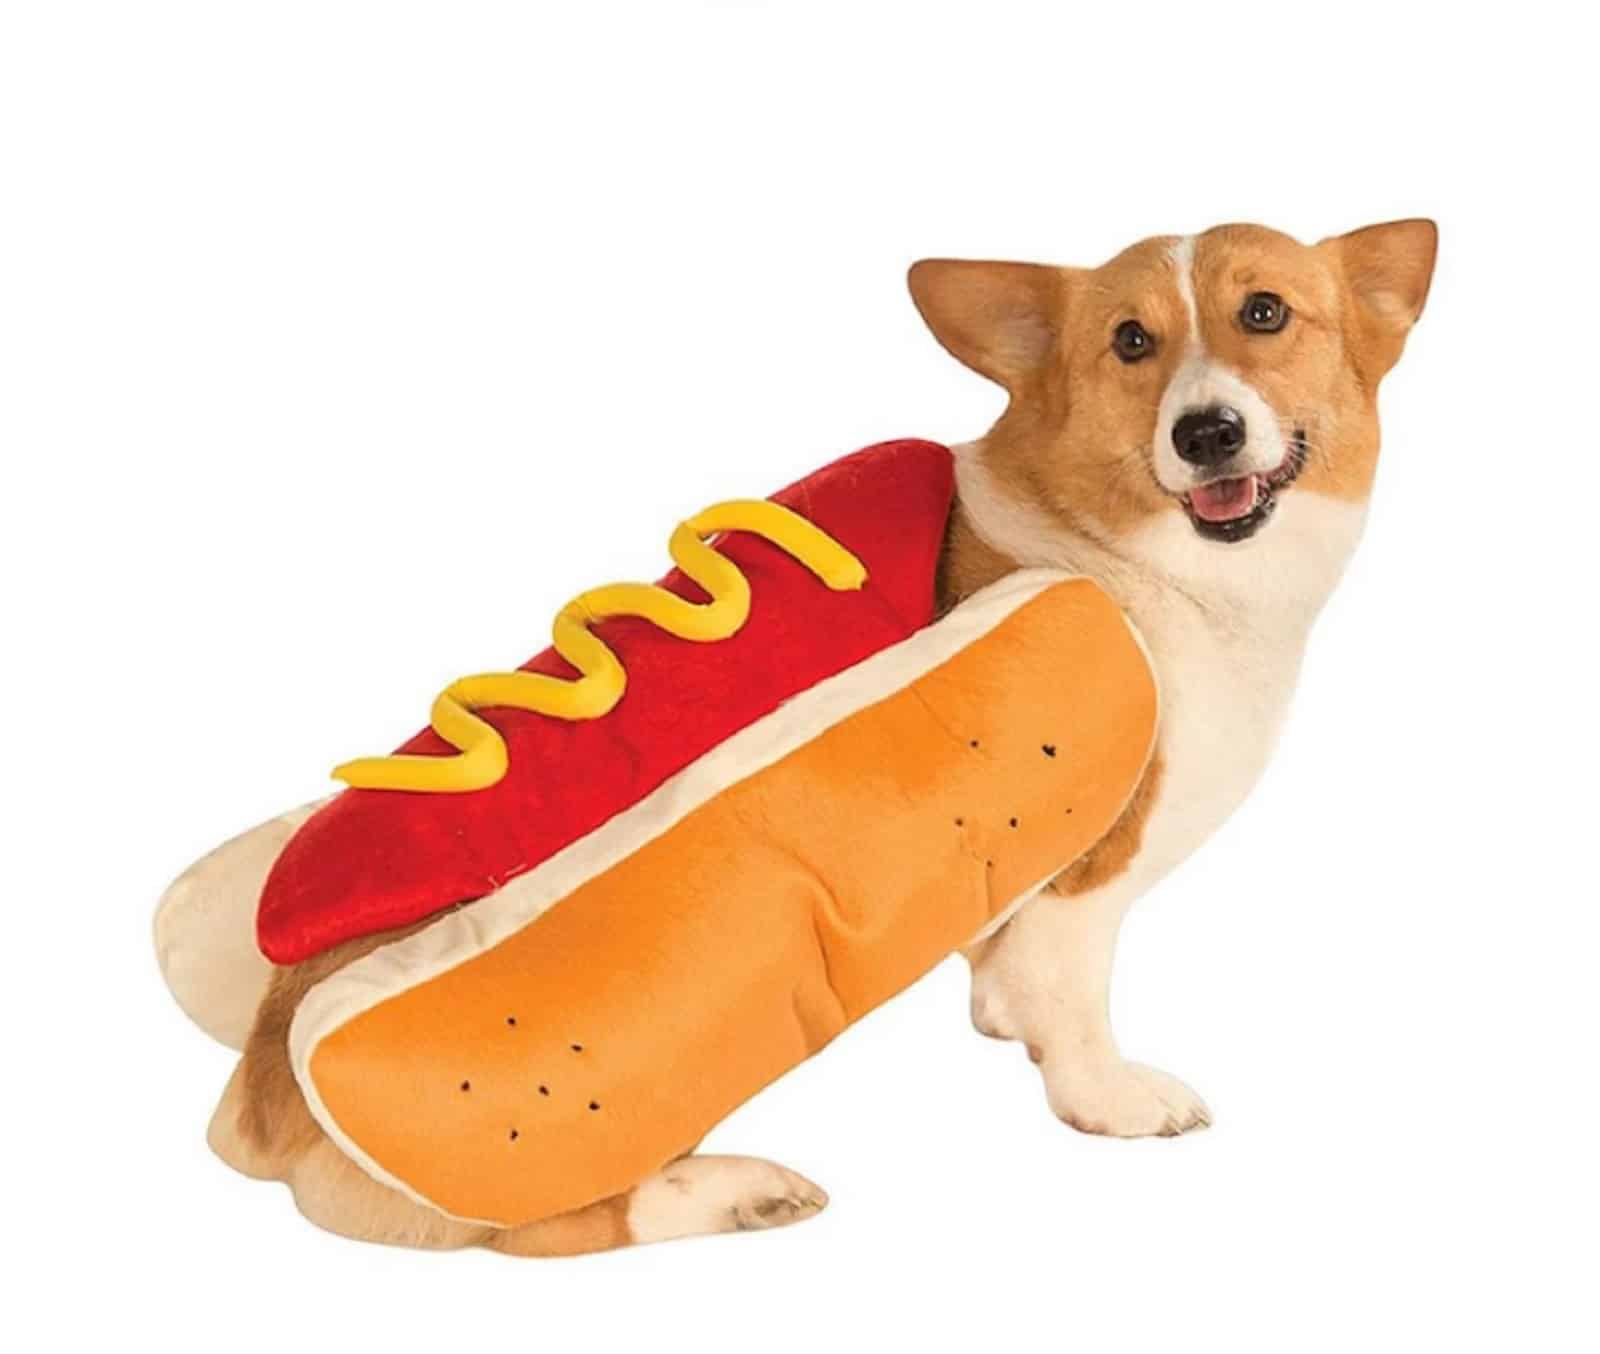 dog wearing hot dog costume looking funny